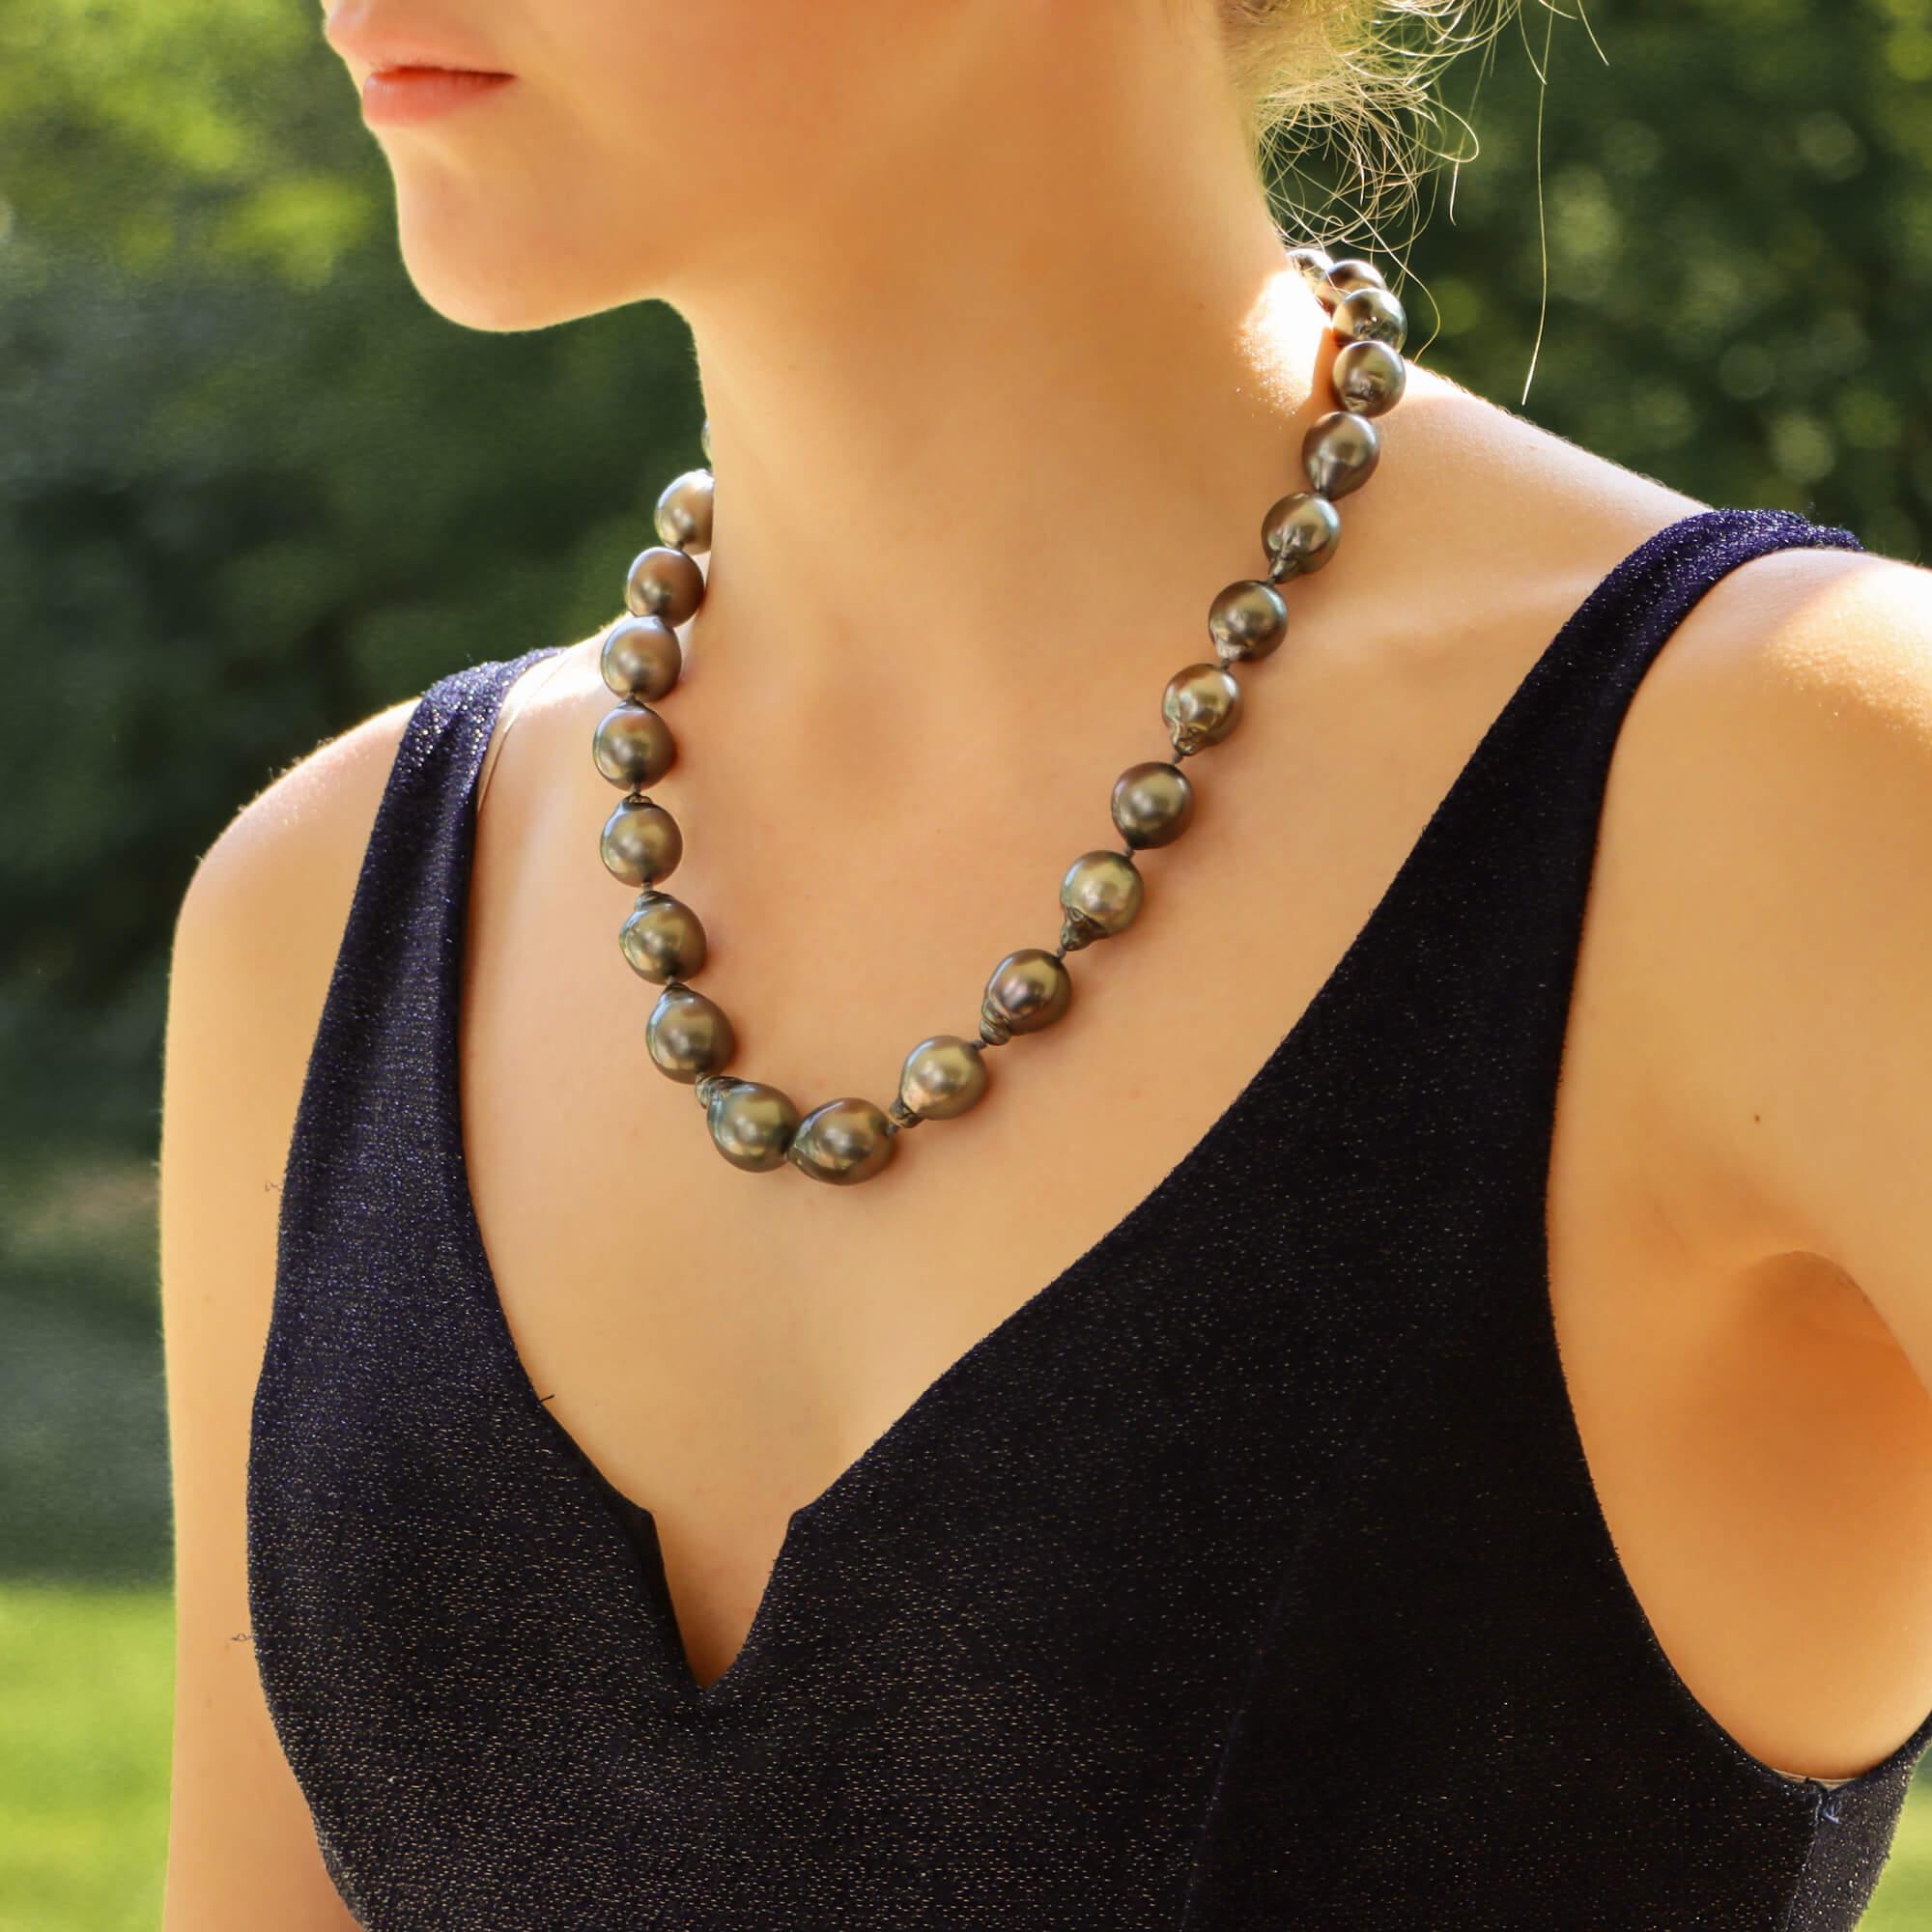 A highly unique Tahitian pearl strand necklace set with a diamond 18k white gold ball clasp.

The strand is composed of 27 individual Tahitian baroque pearls, all varying in size from 14-22 millimetres. The necklace is fastened with an 18k white